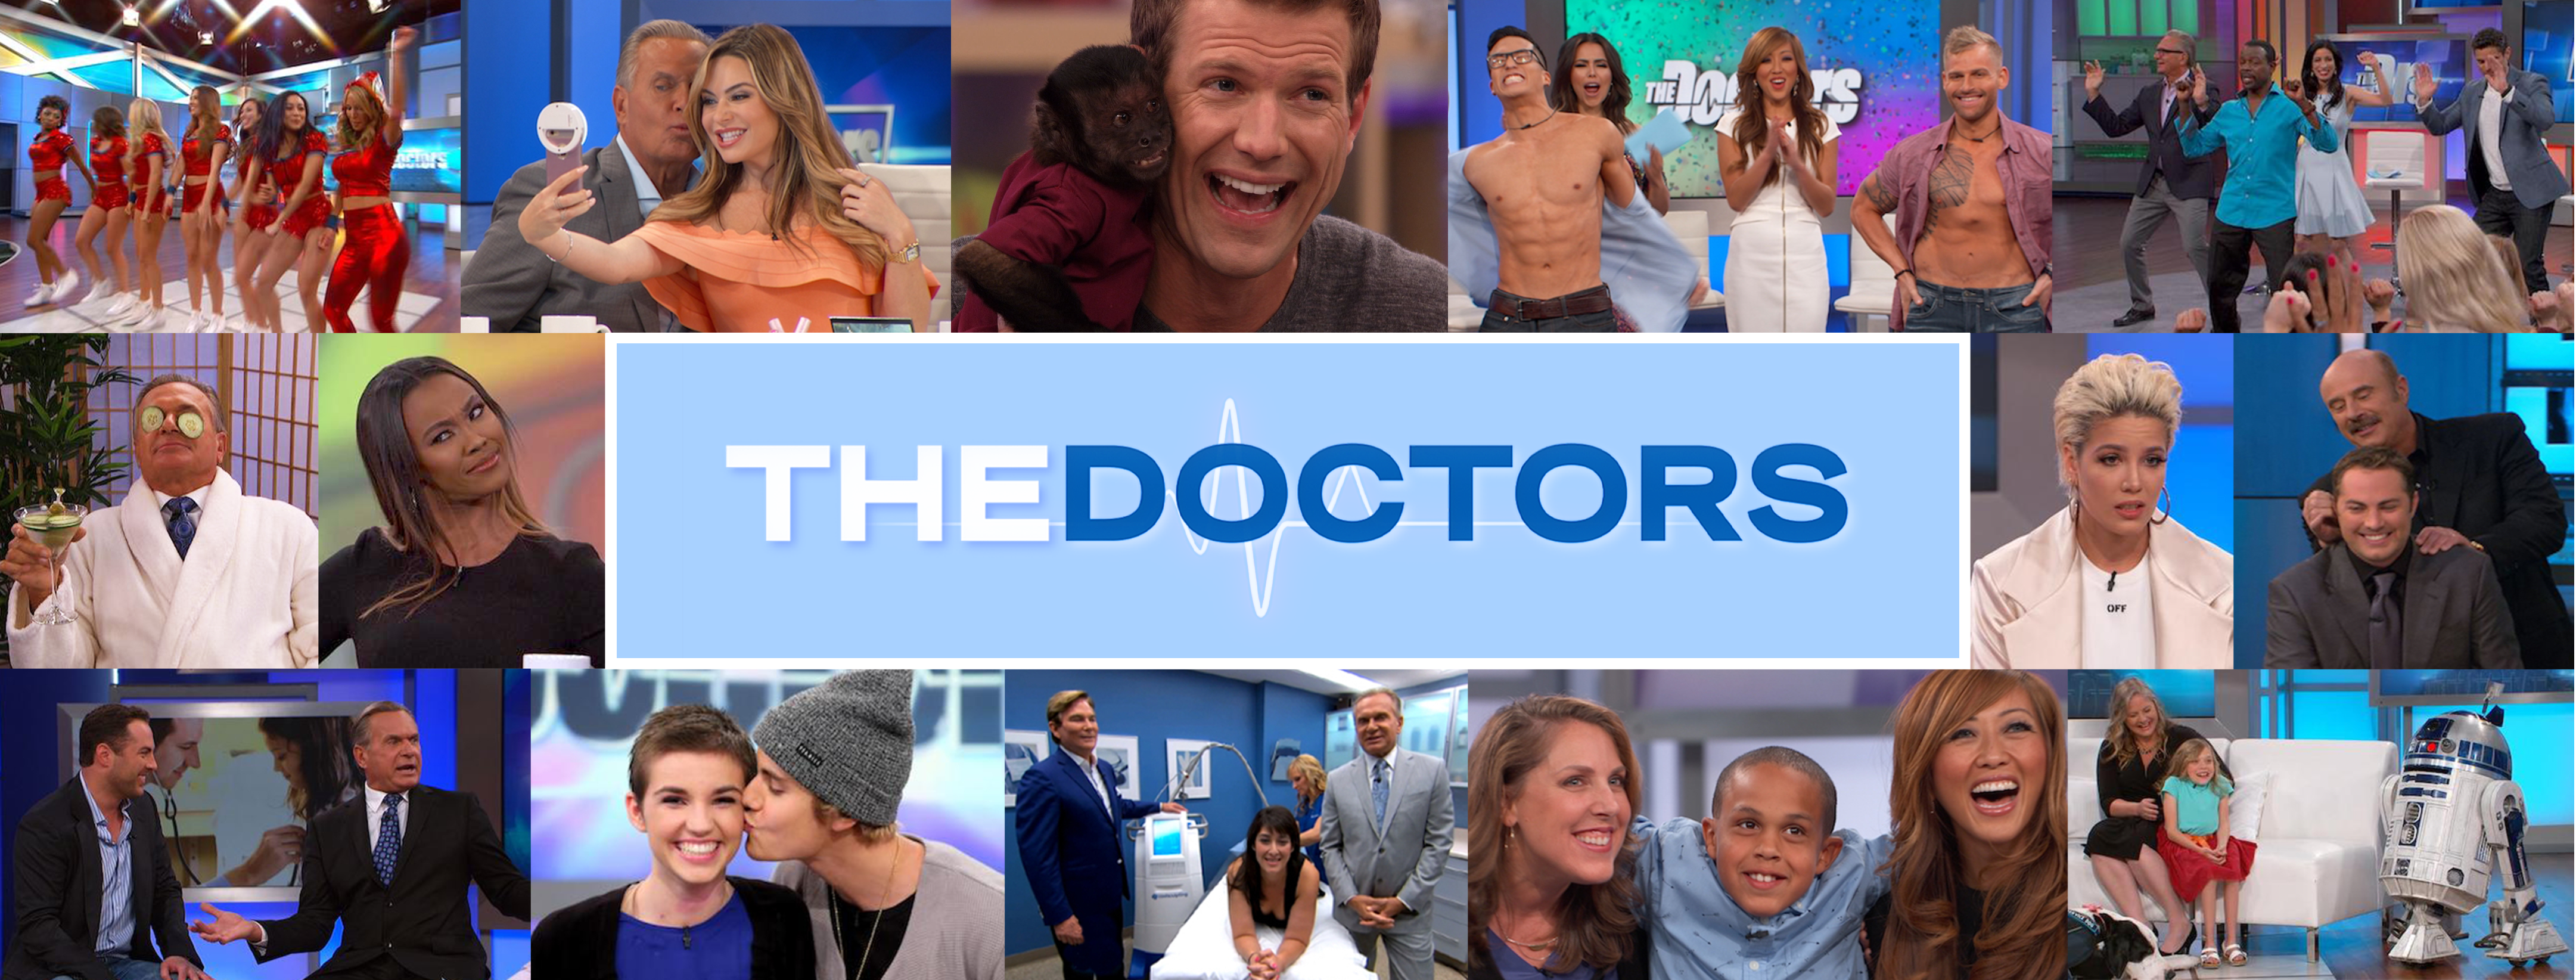 The Death of Bob Marley | The Doctors TV Show